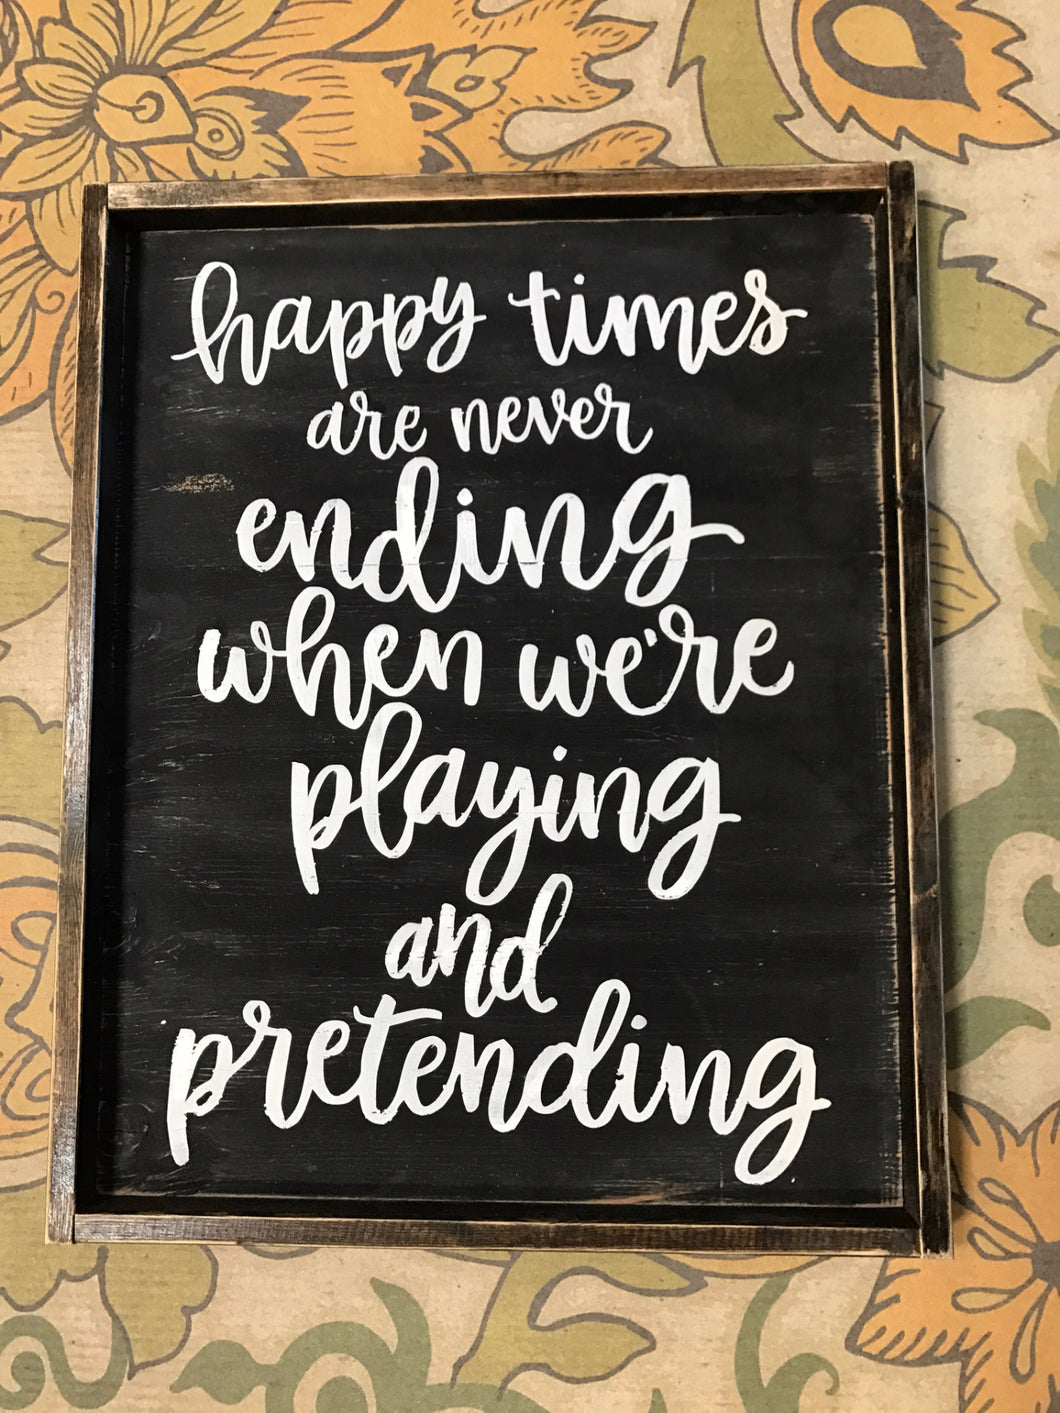 Happy times are never ending